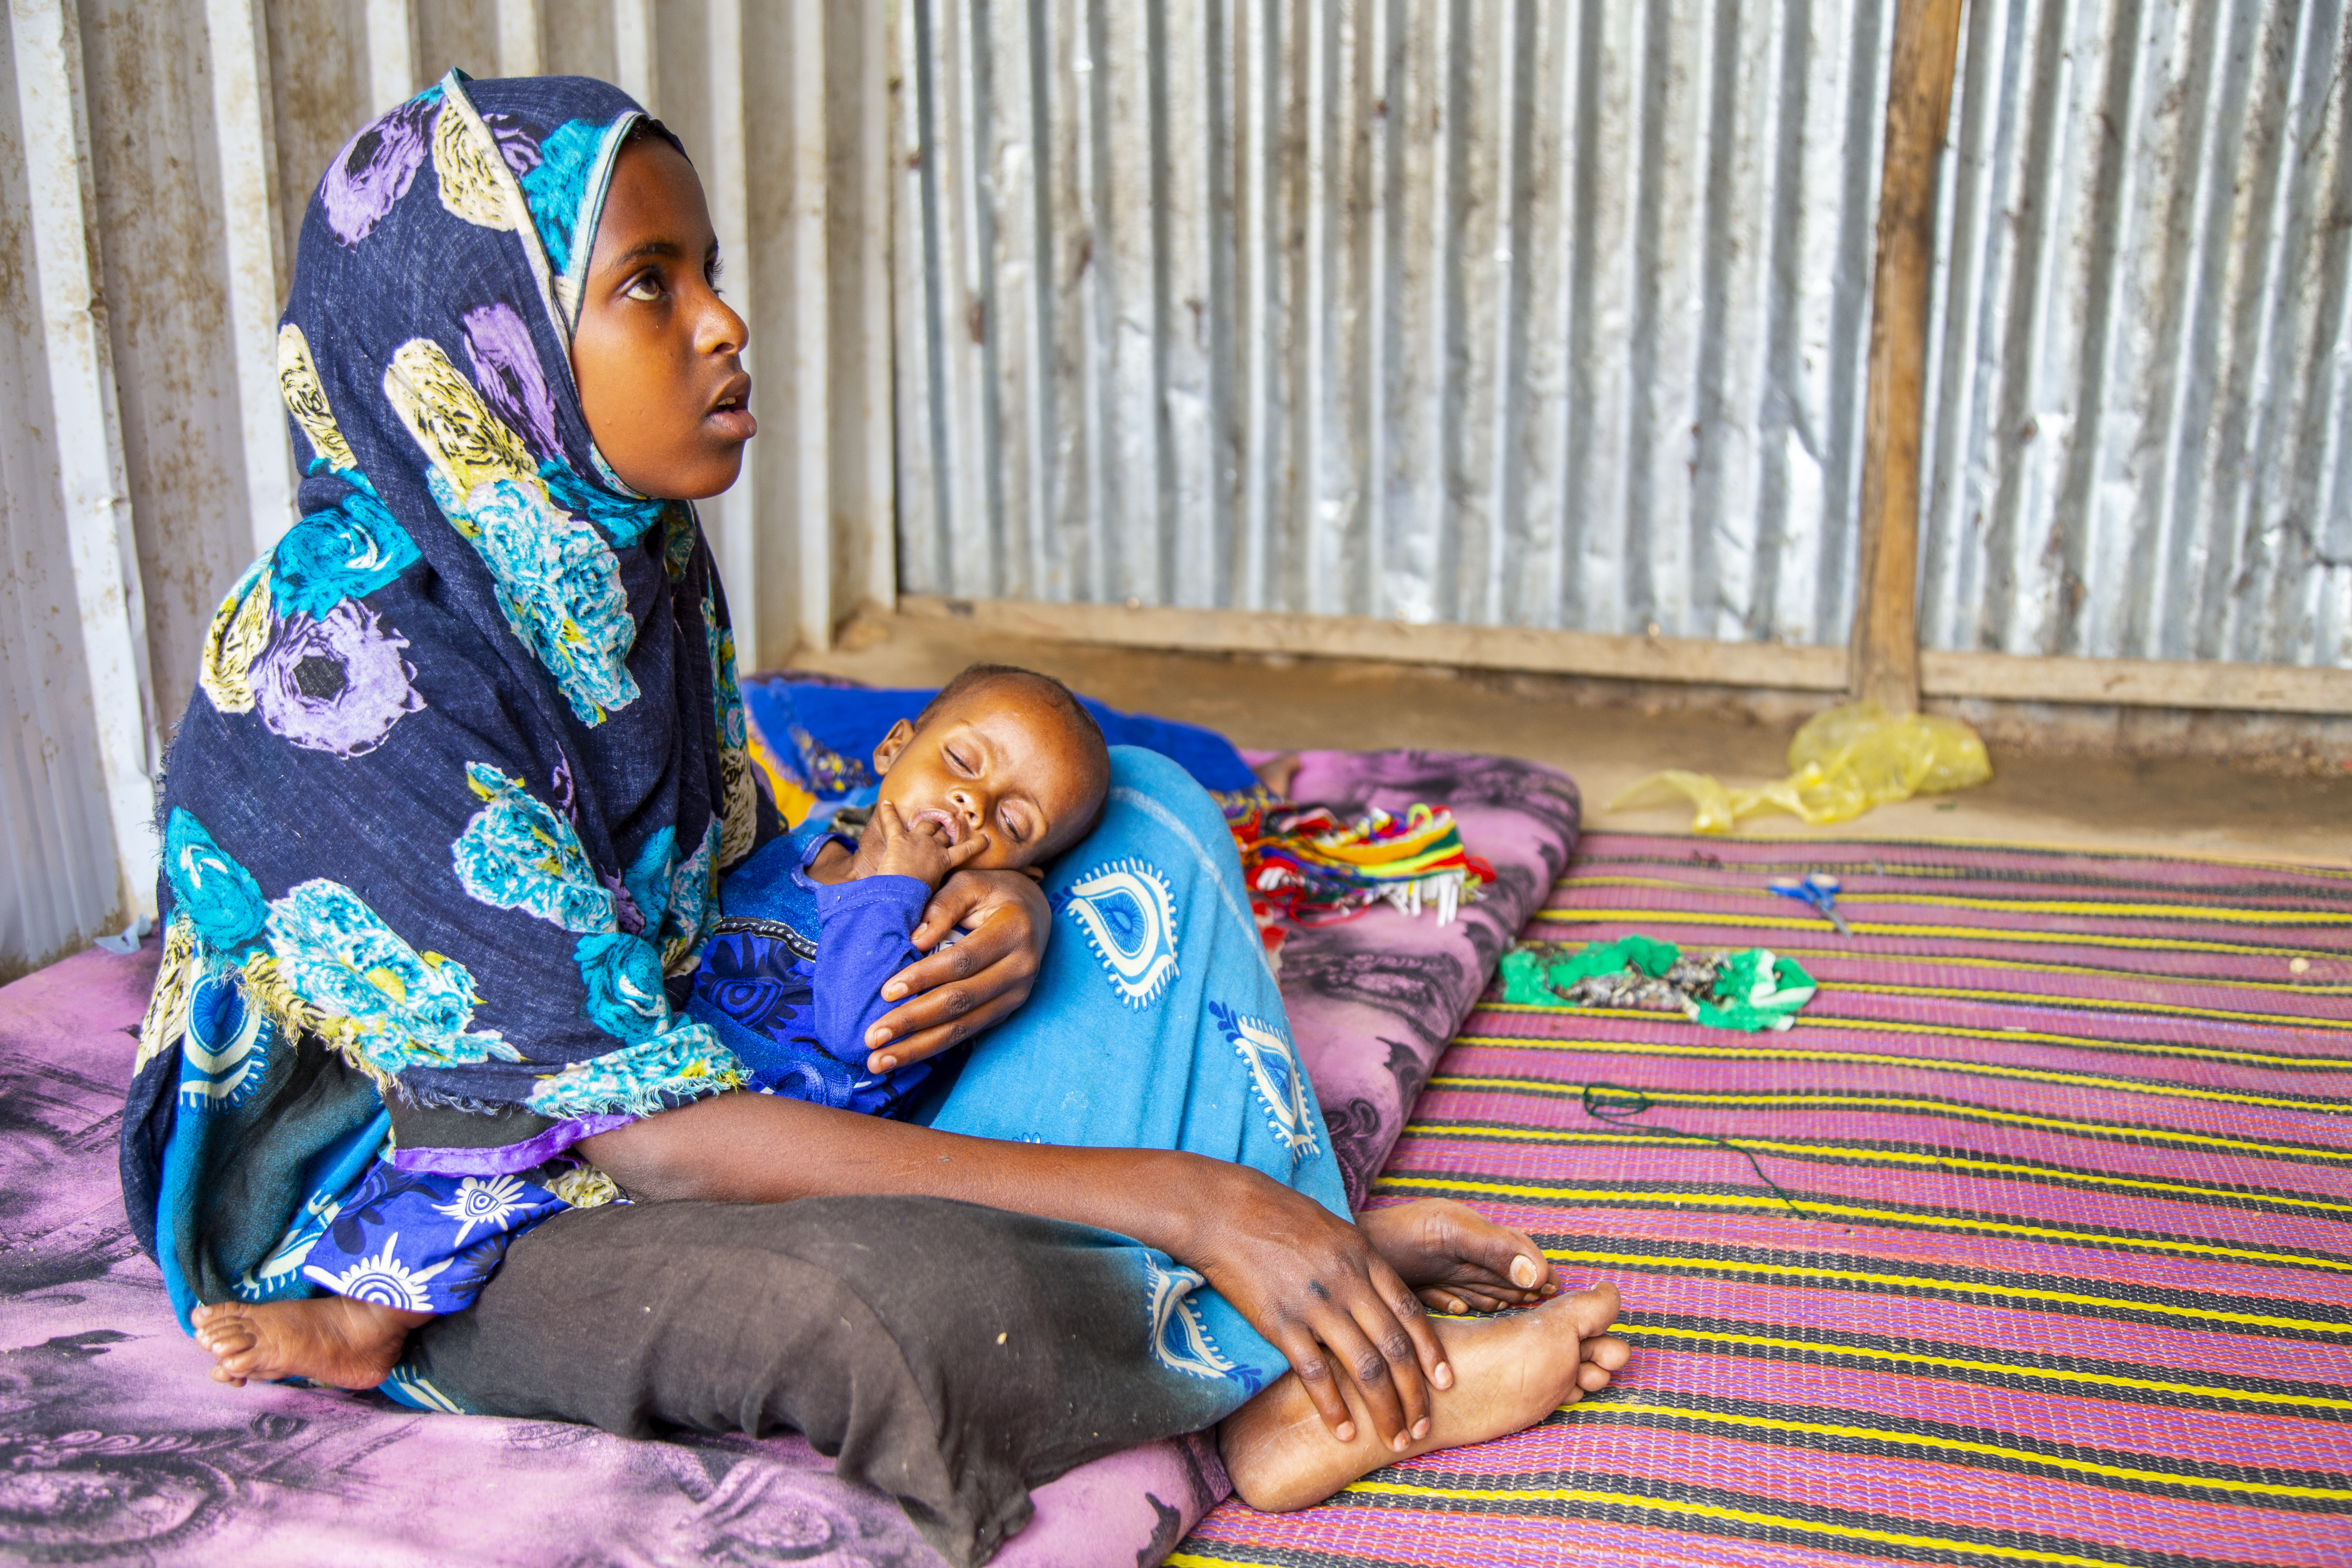 14-year-old Rahima, looks after her sibling Hamdi